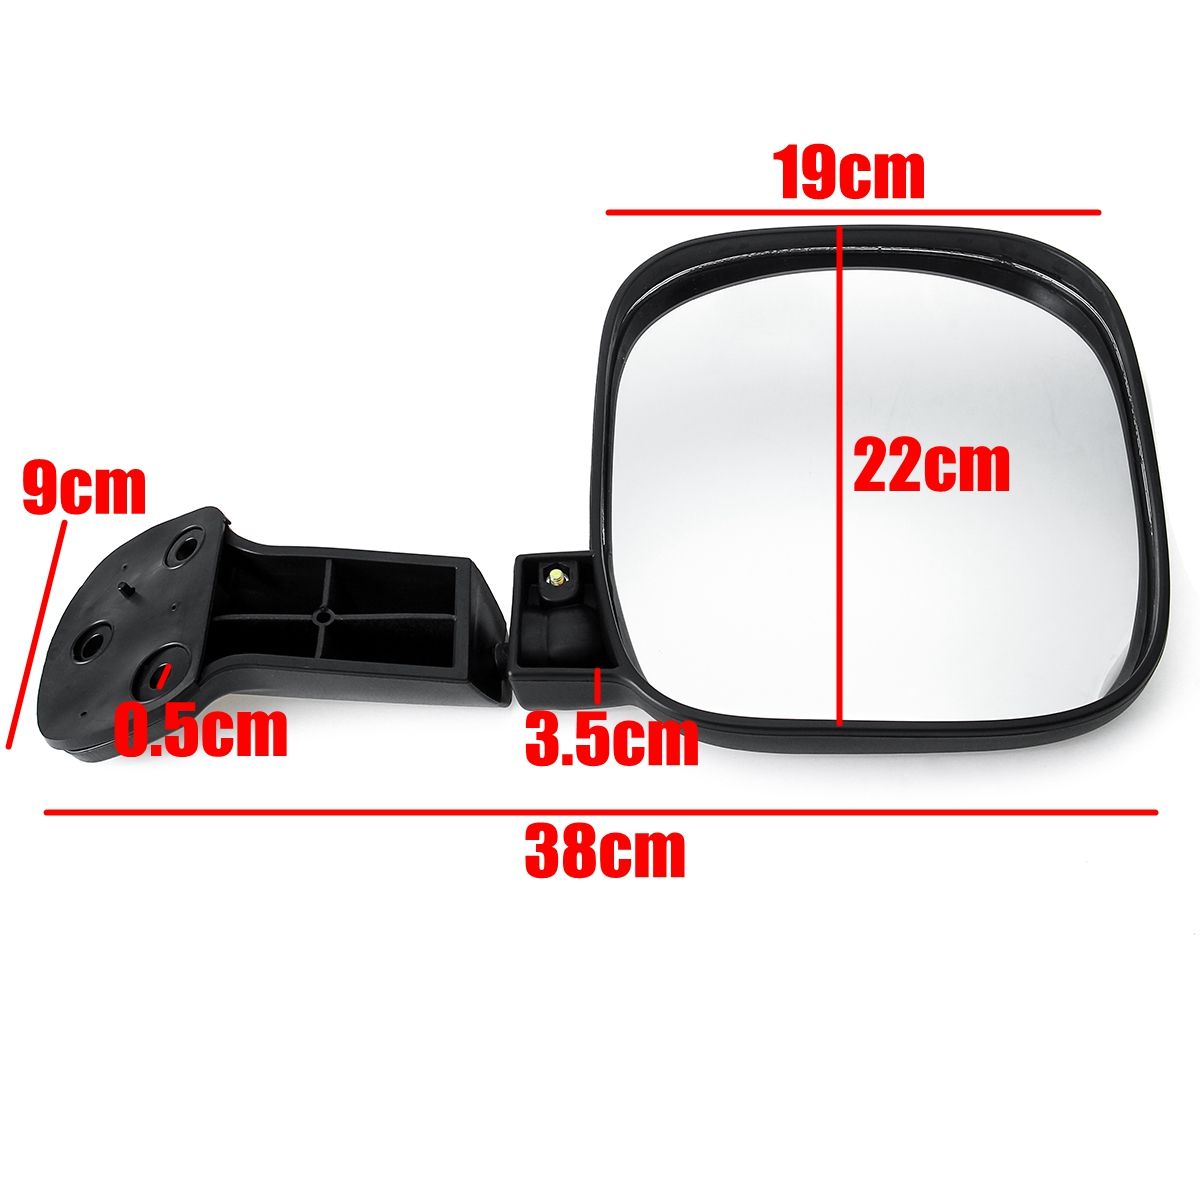 Rear-Tailgate-Door-Mirror-Assembly-For-Toyota-Hiace-H200-Series-2005-2013-1769229